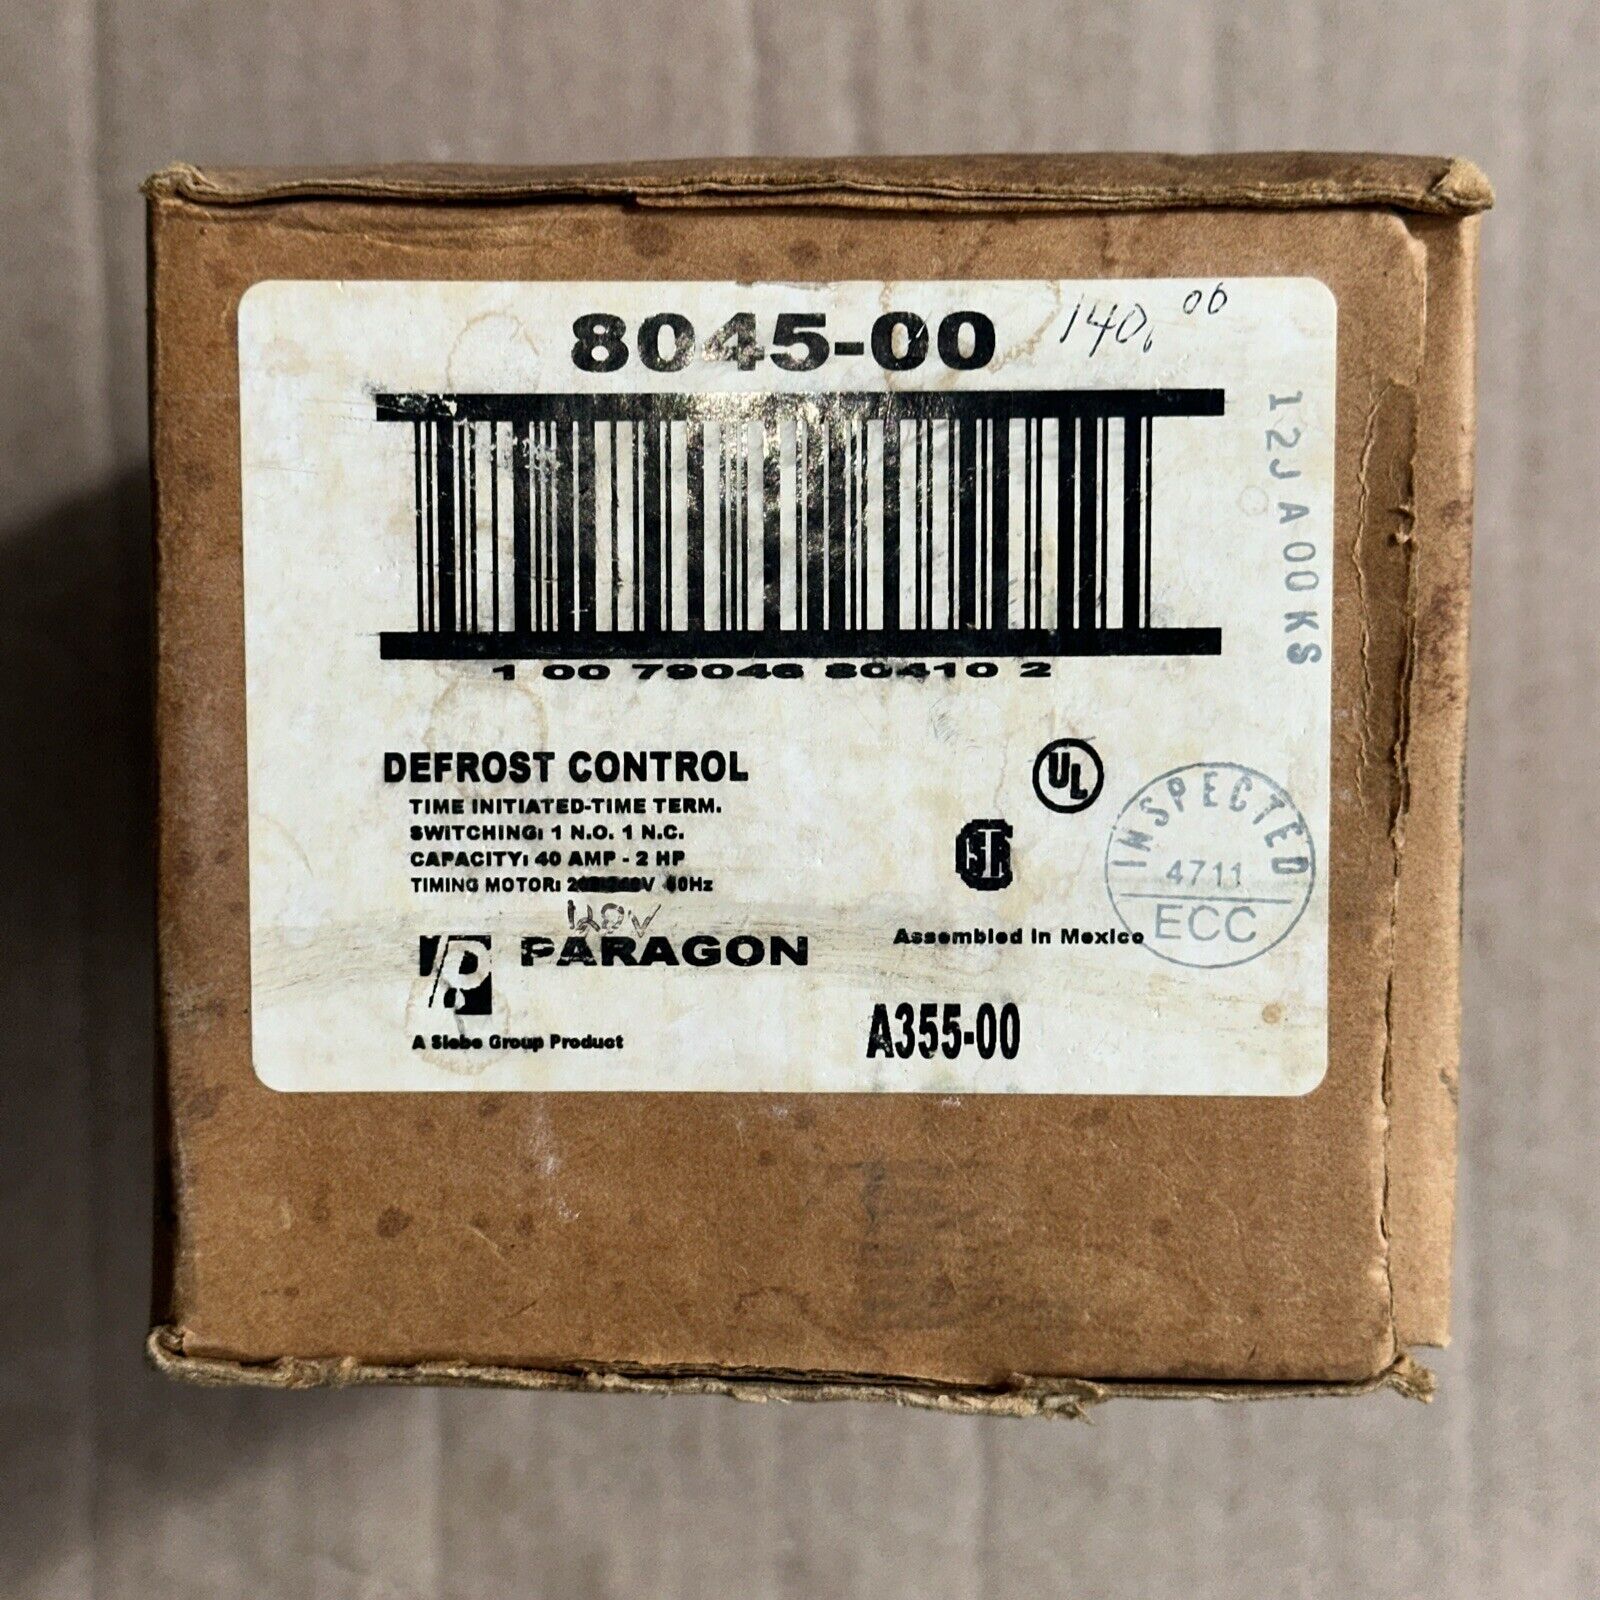 NEW IN BOX Paragon 8045-00 Defrost Control Timer Commercial Refrigeration Timer